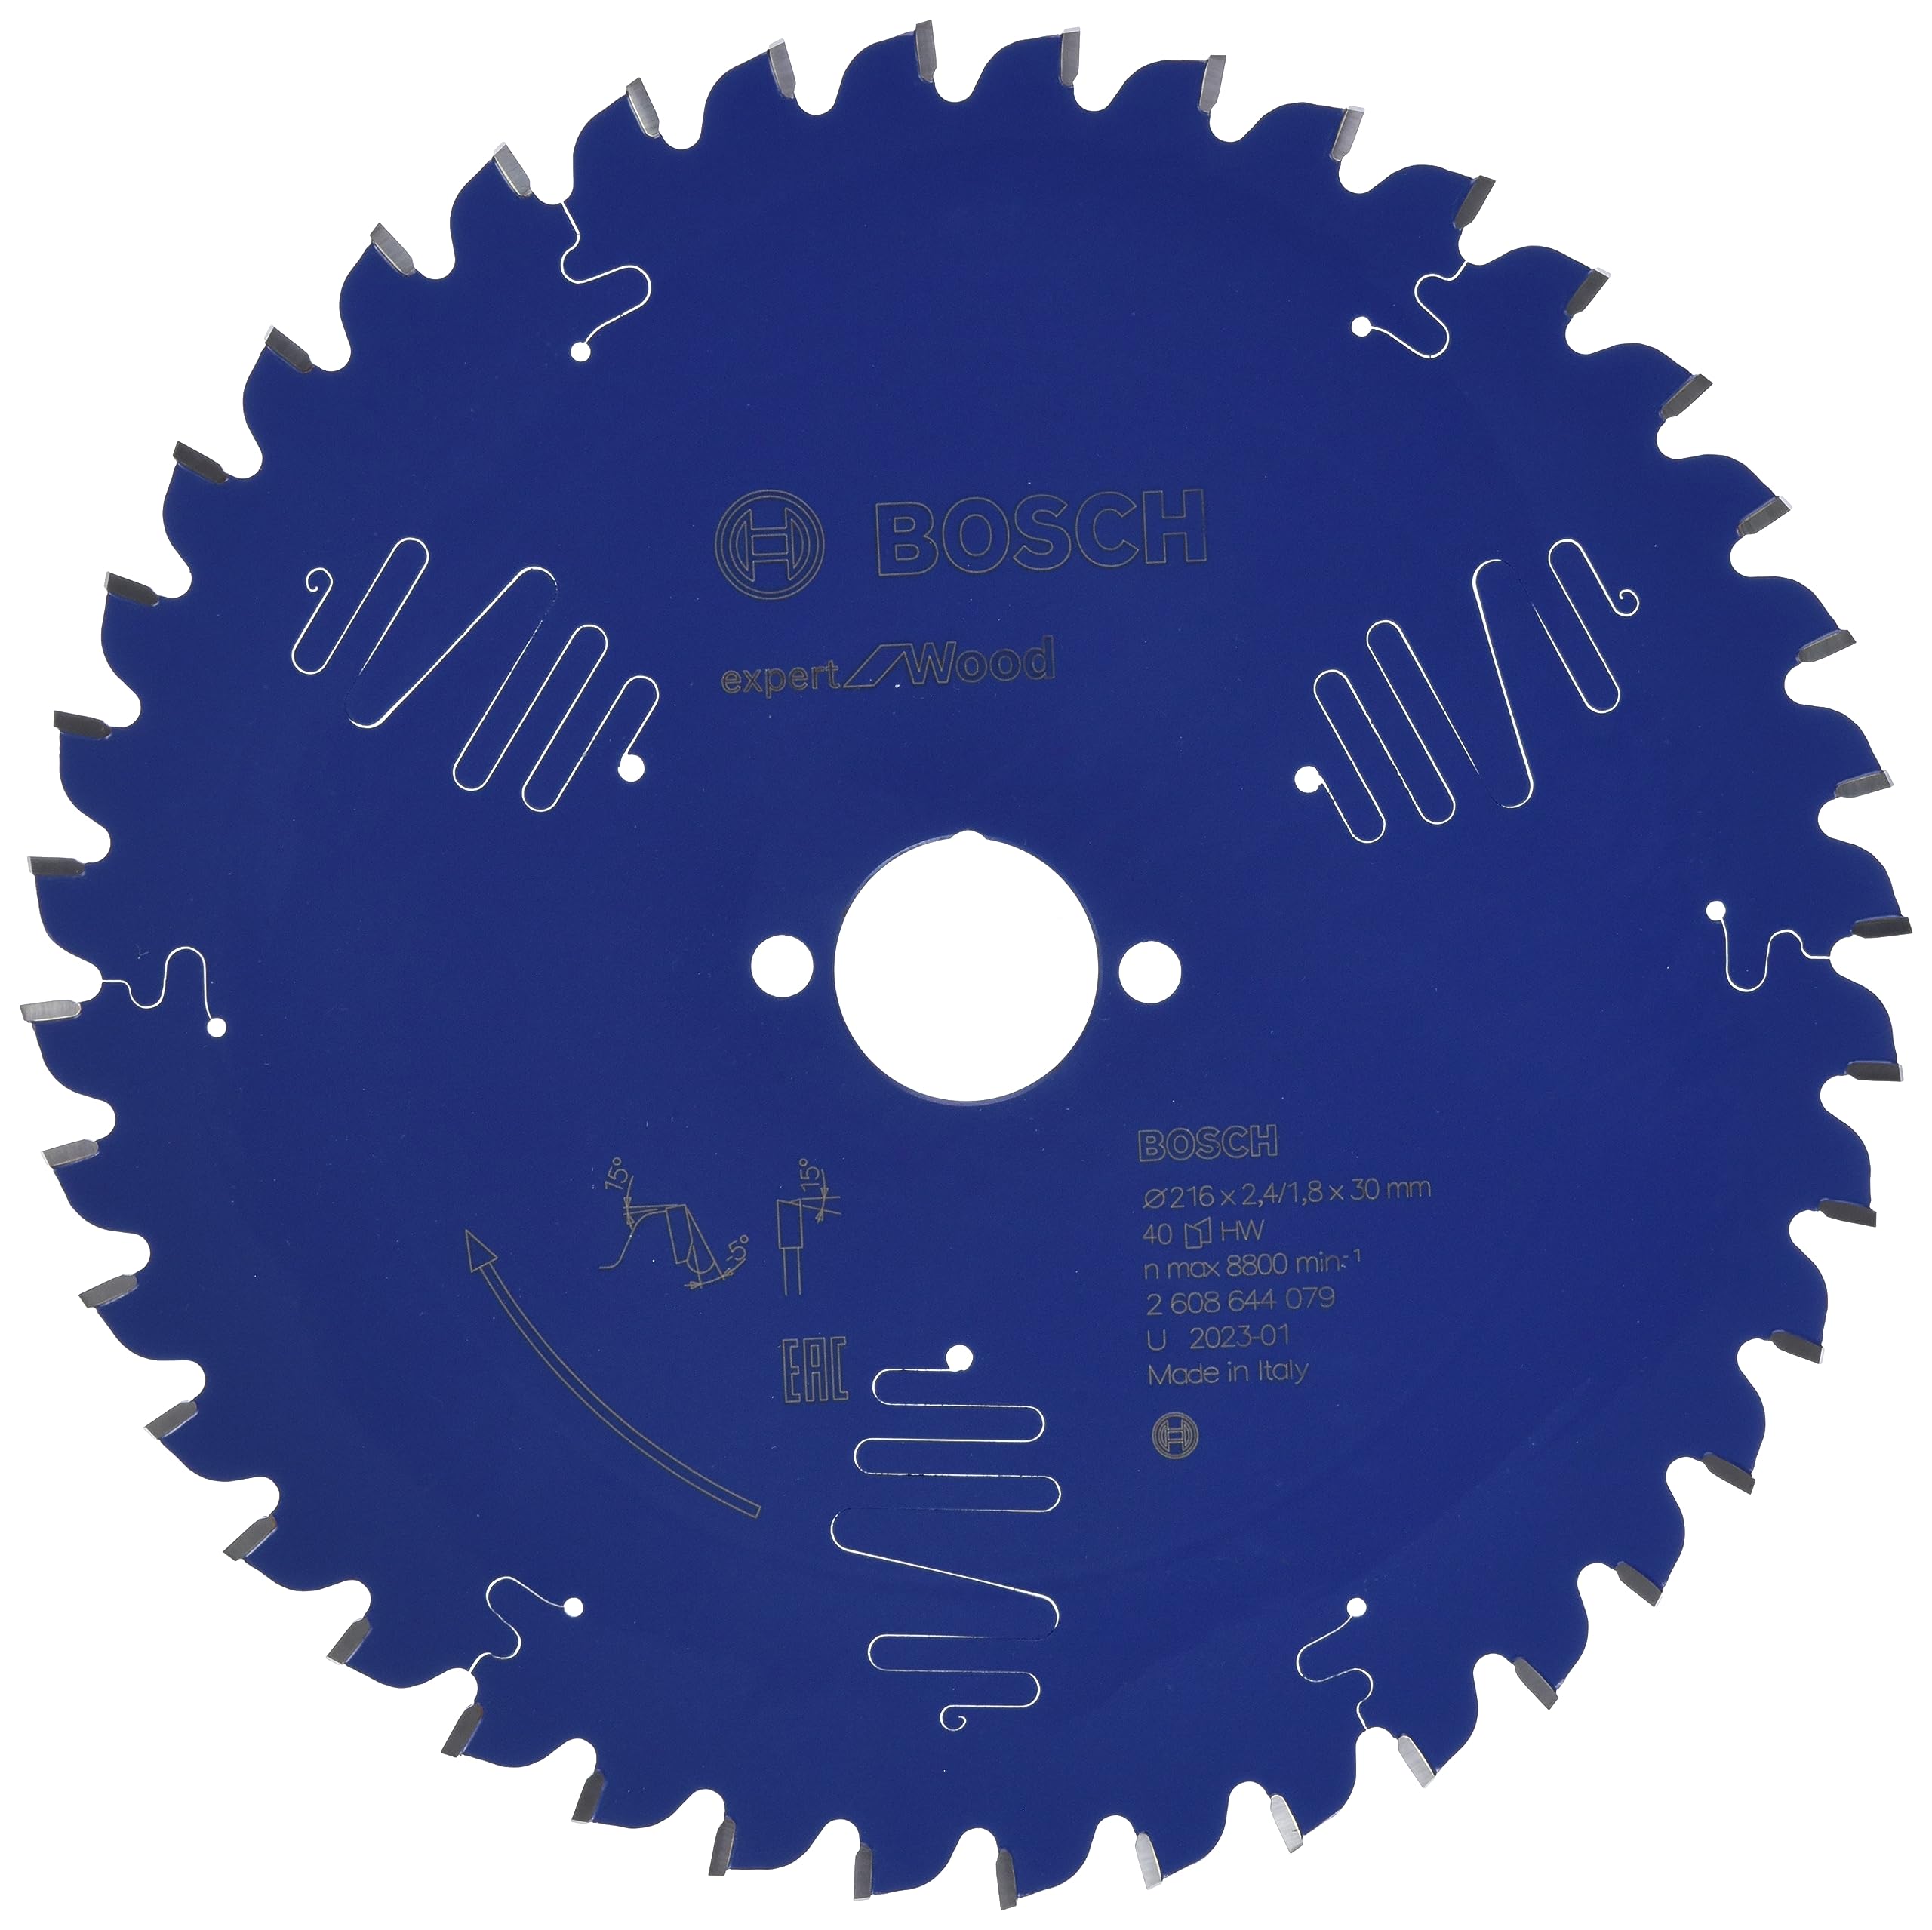 Bosch Expert Circular Saw Blade for Wood 216 x 30 x 2,4 mm, 40 2608644079 Power Tool Services